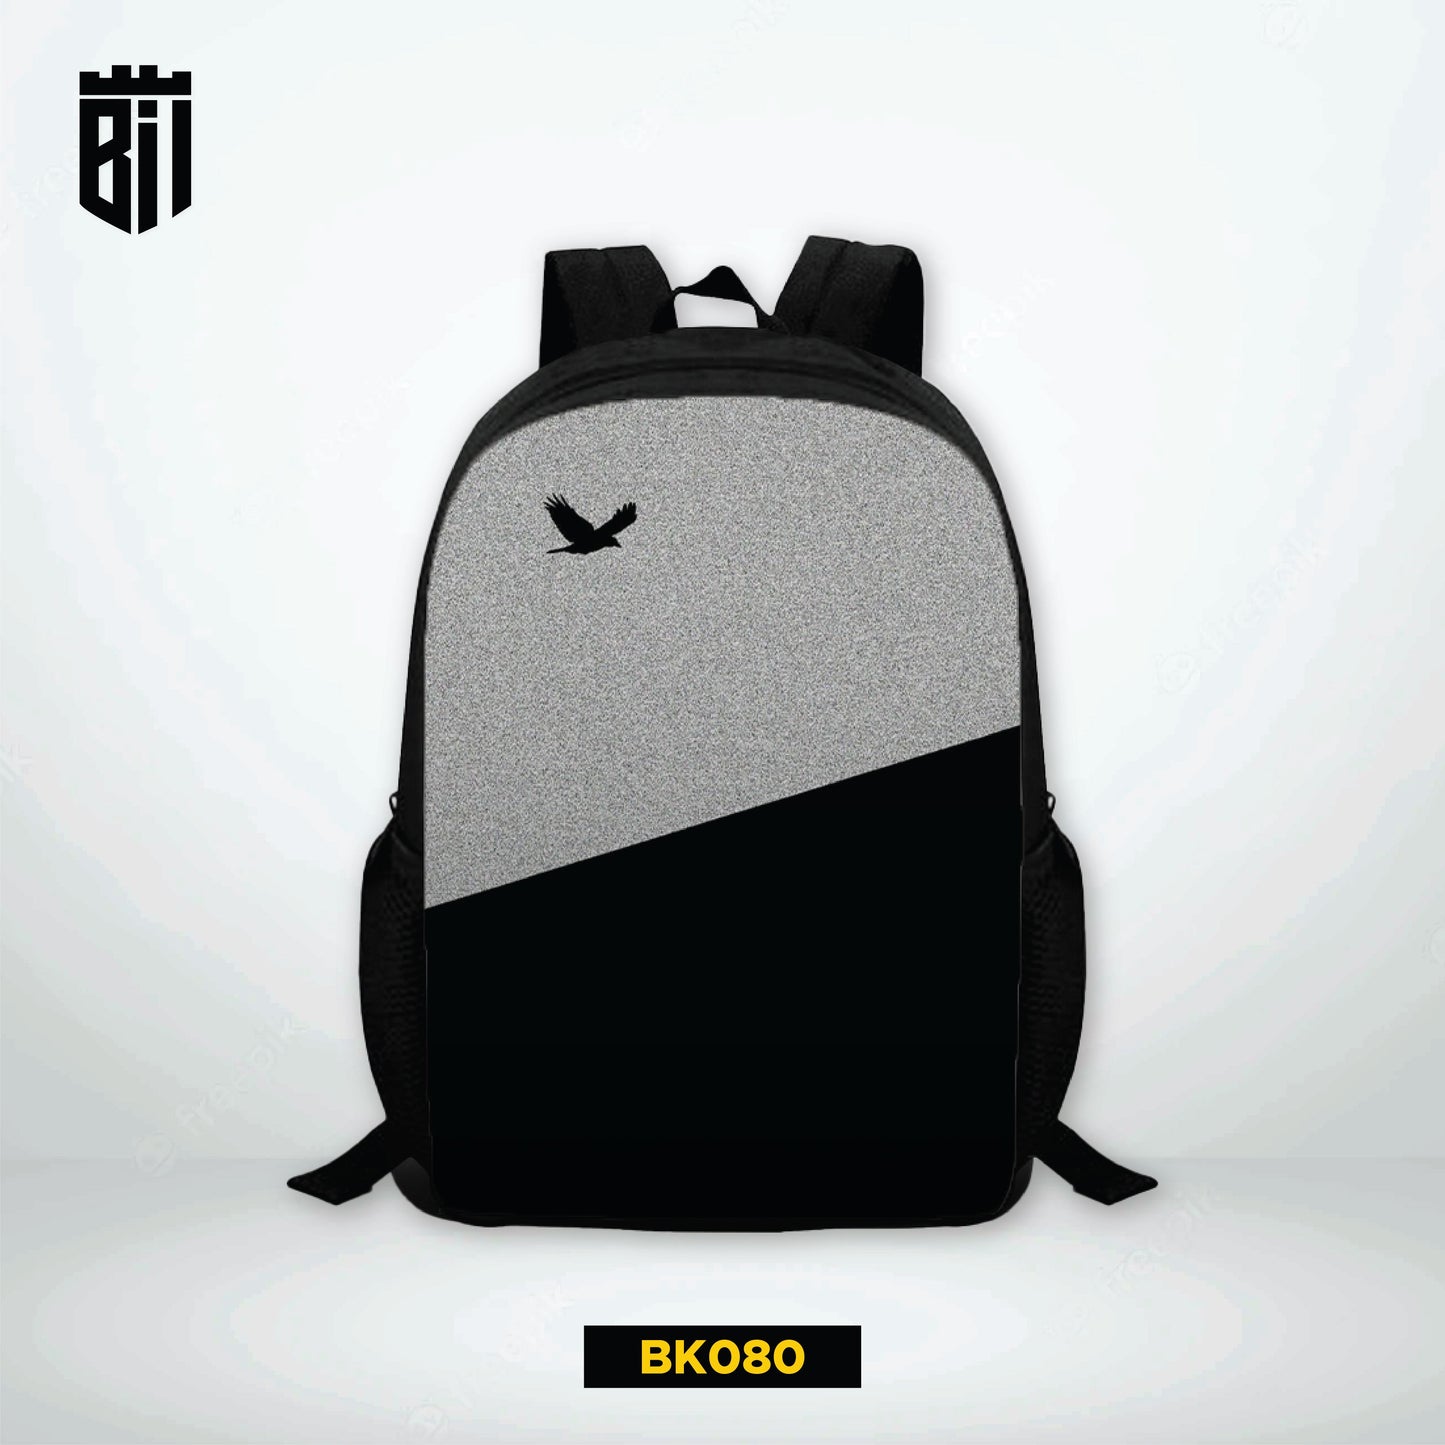 BK080 Scolthers Backpack